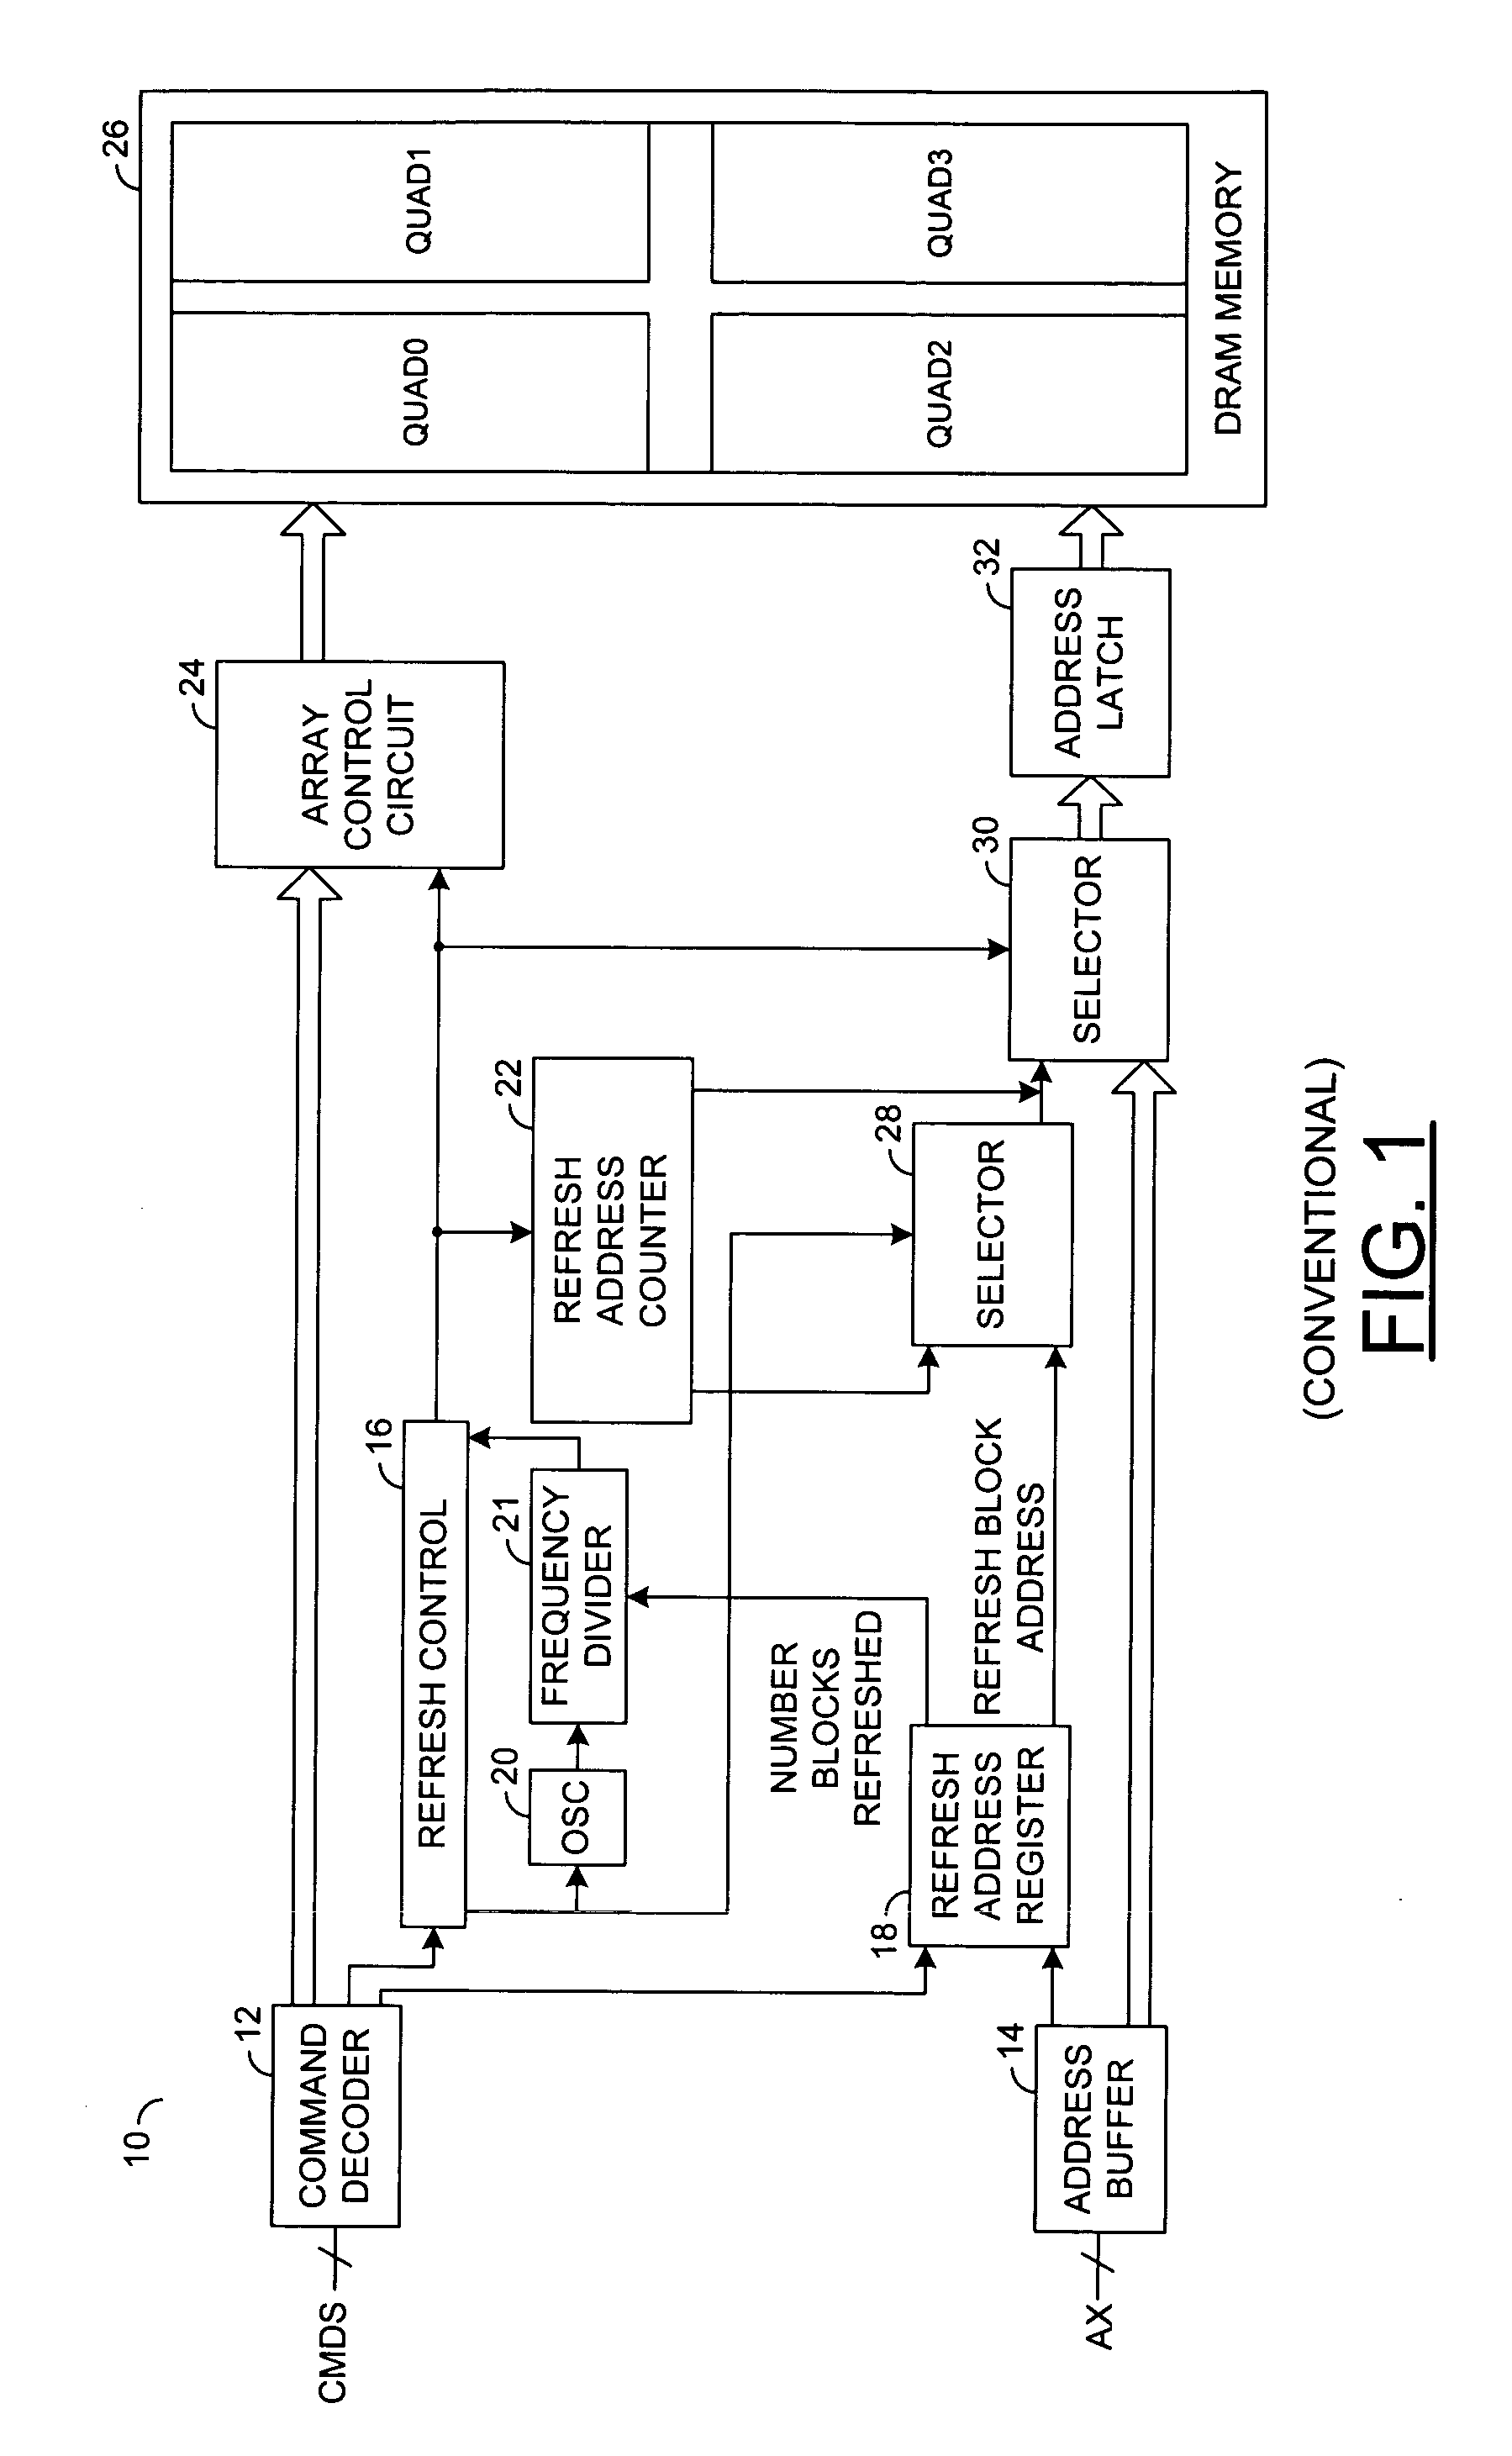 Method and architecture for reducing the power consumption for memory devices in refresh operations